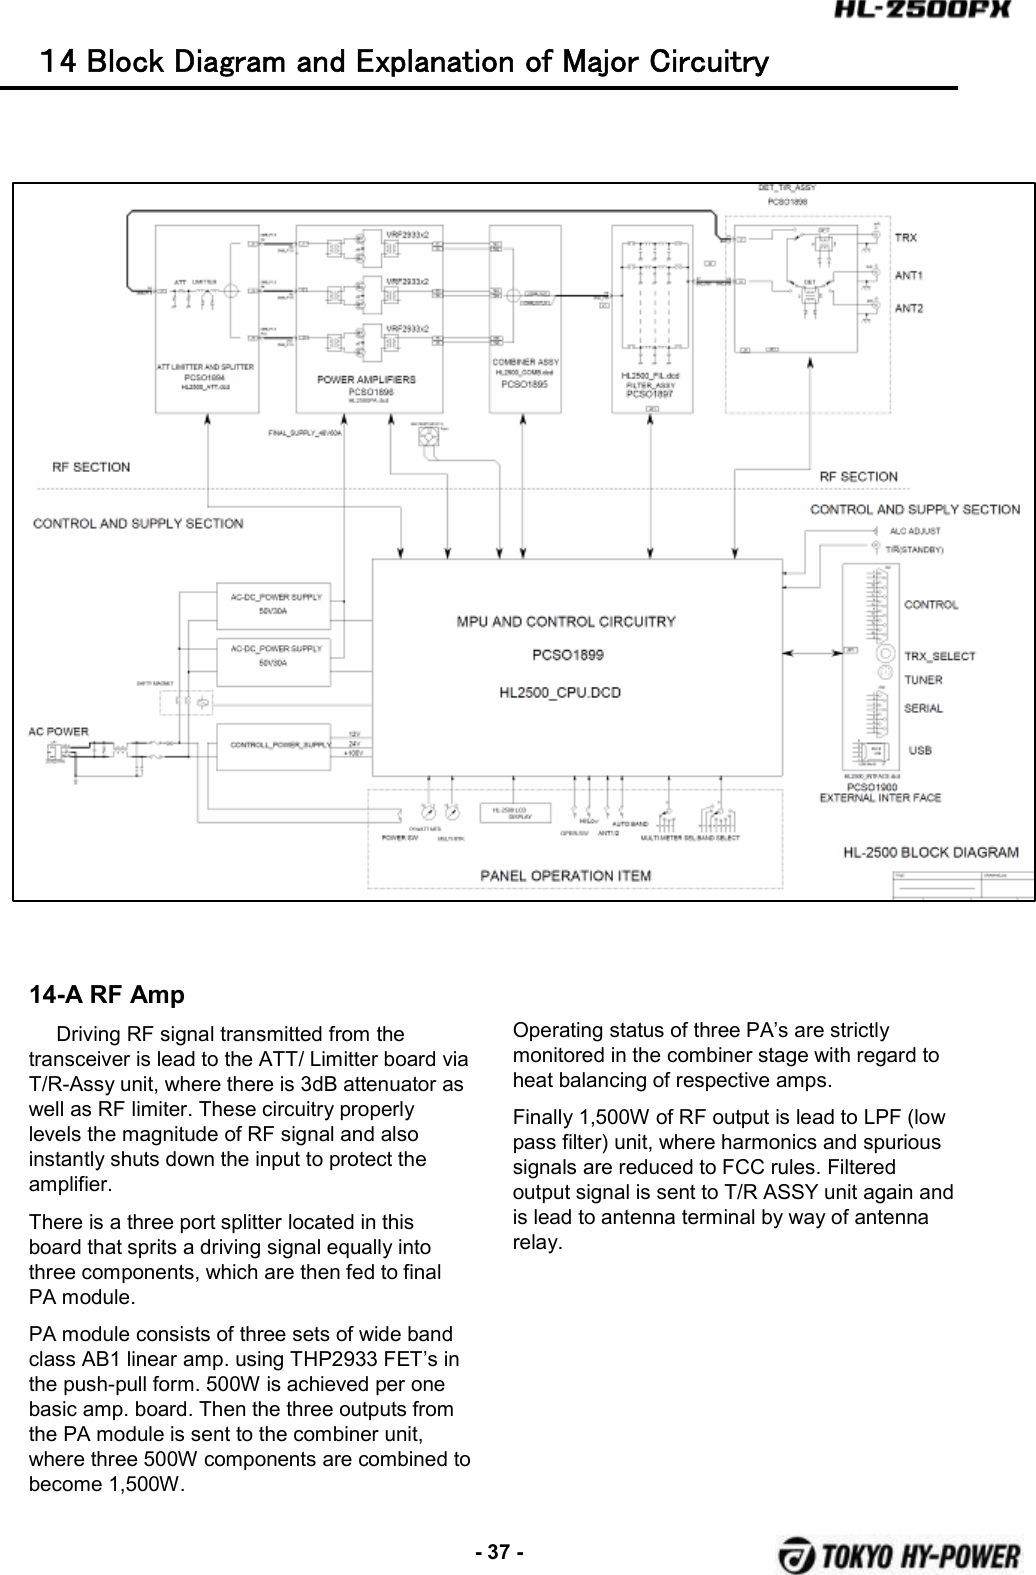 -37 -１4  Block  Diagram  and  Explanation   of  Major  Circu itry14-A RF AmpDriving RF signal transmitted from the transceiver is lead to the ATT/ Limitter board via T/R-Assy unit, where there is 3dB attenuator as well as RF limiter. These circuitry properly levels the magnitude of RF signal and also instantly shuts down the input to protect the amplifier. There is a three port splitter located in this board that sprits a driving signal equally into three components, which are then fed to final PA module.PA module consists of three sets of wide band class AB1 linear amp. using THP2933 FET’s in the push-pull form. 500W is achieved per one basic amp. board. Then the three outputs from the PA module is sent to the combiner unit, where three 500W components are combined to become 1,500W. Operating status of three PA’s are strictly monitored in the combiner stage with regard to heat balancing of respective amps.Finally 1,500W of RF output is lead to LPF (low pass filter) unit, where harmonics and spurious signals are reduced to FCC rules. Filtered output signal is sent to T/R ASSY unit again and is lead to antenna terminal by way of antenna relay.